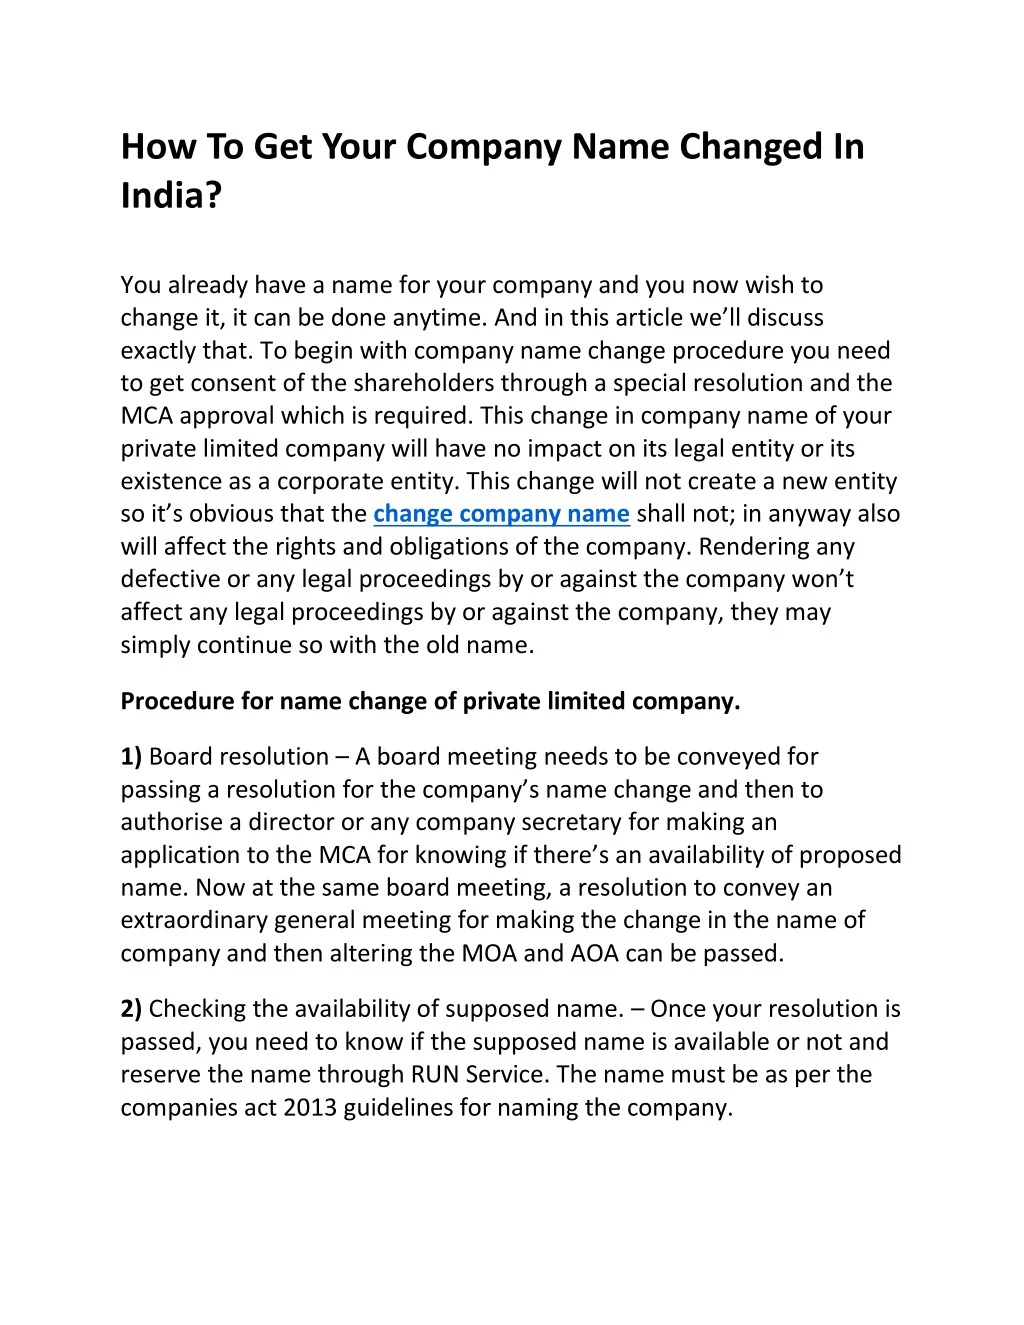 how to get your company name changed in india